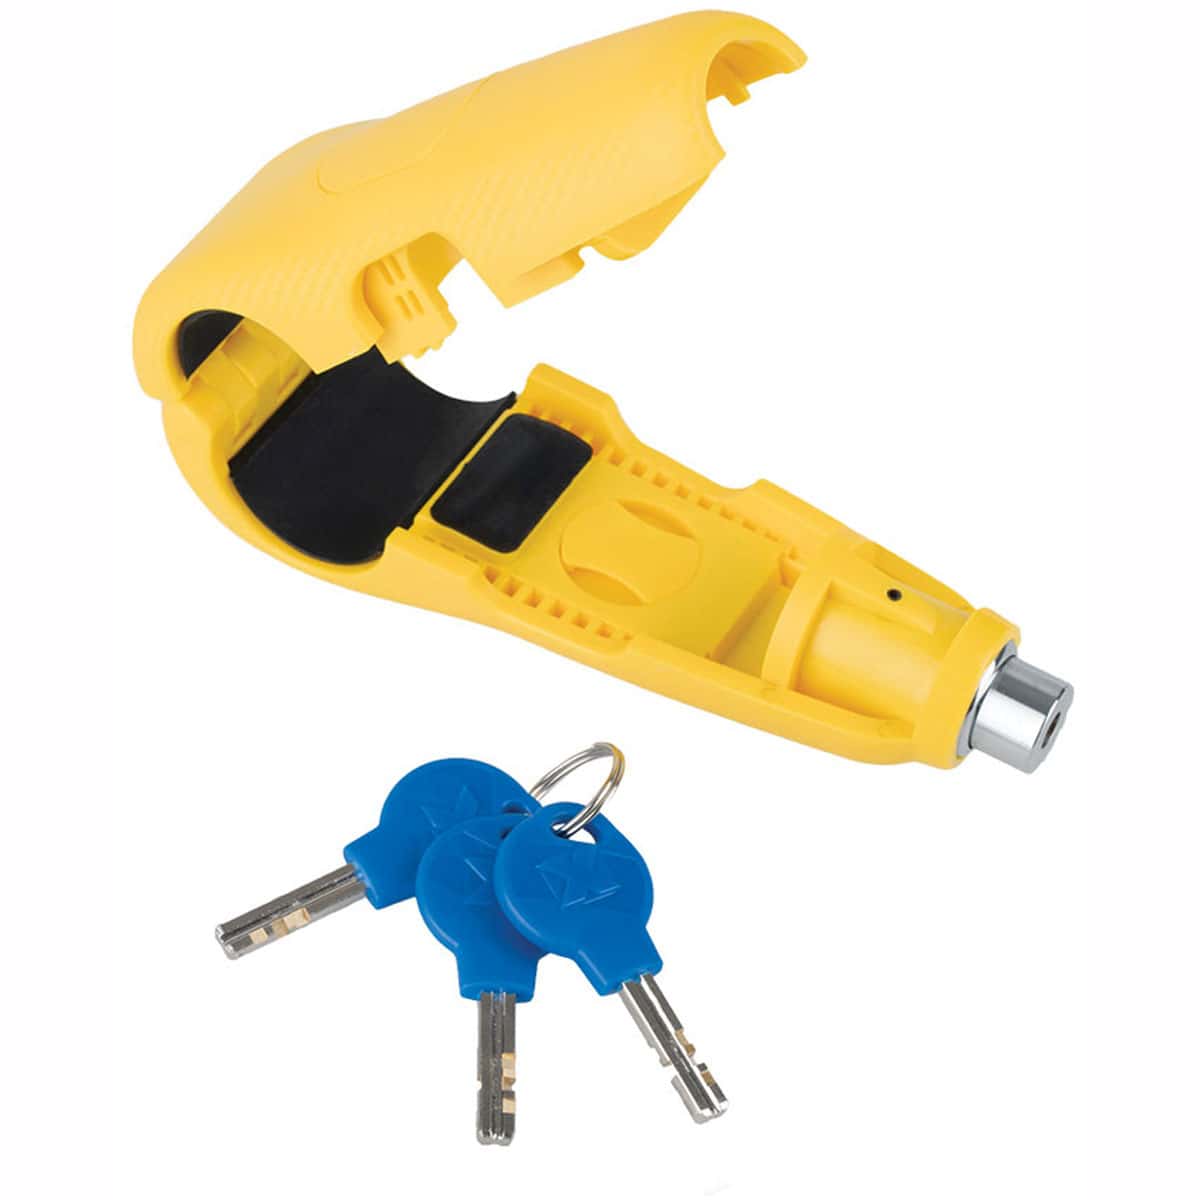 The Oxford LeverLock Motorcycle Throttle and Brake Security Lock is an easy-to-use, highly visible and easy to install theft deterrent for all scooters, motorcycles and ATVs